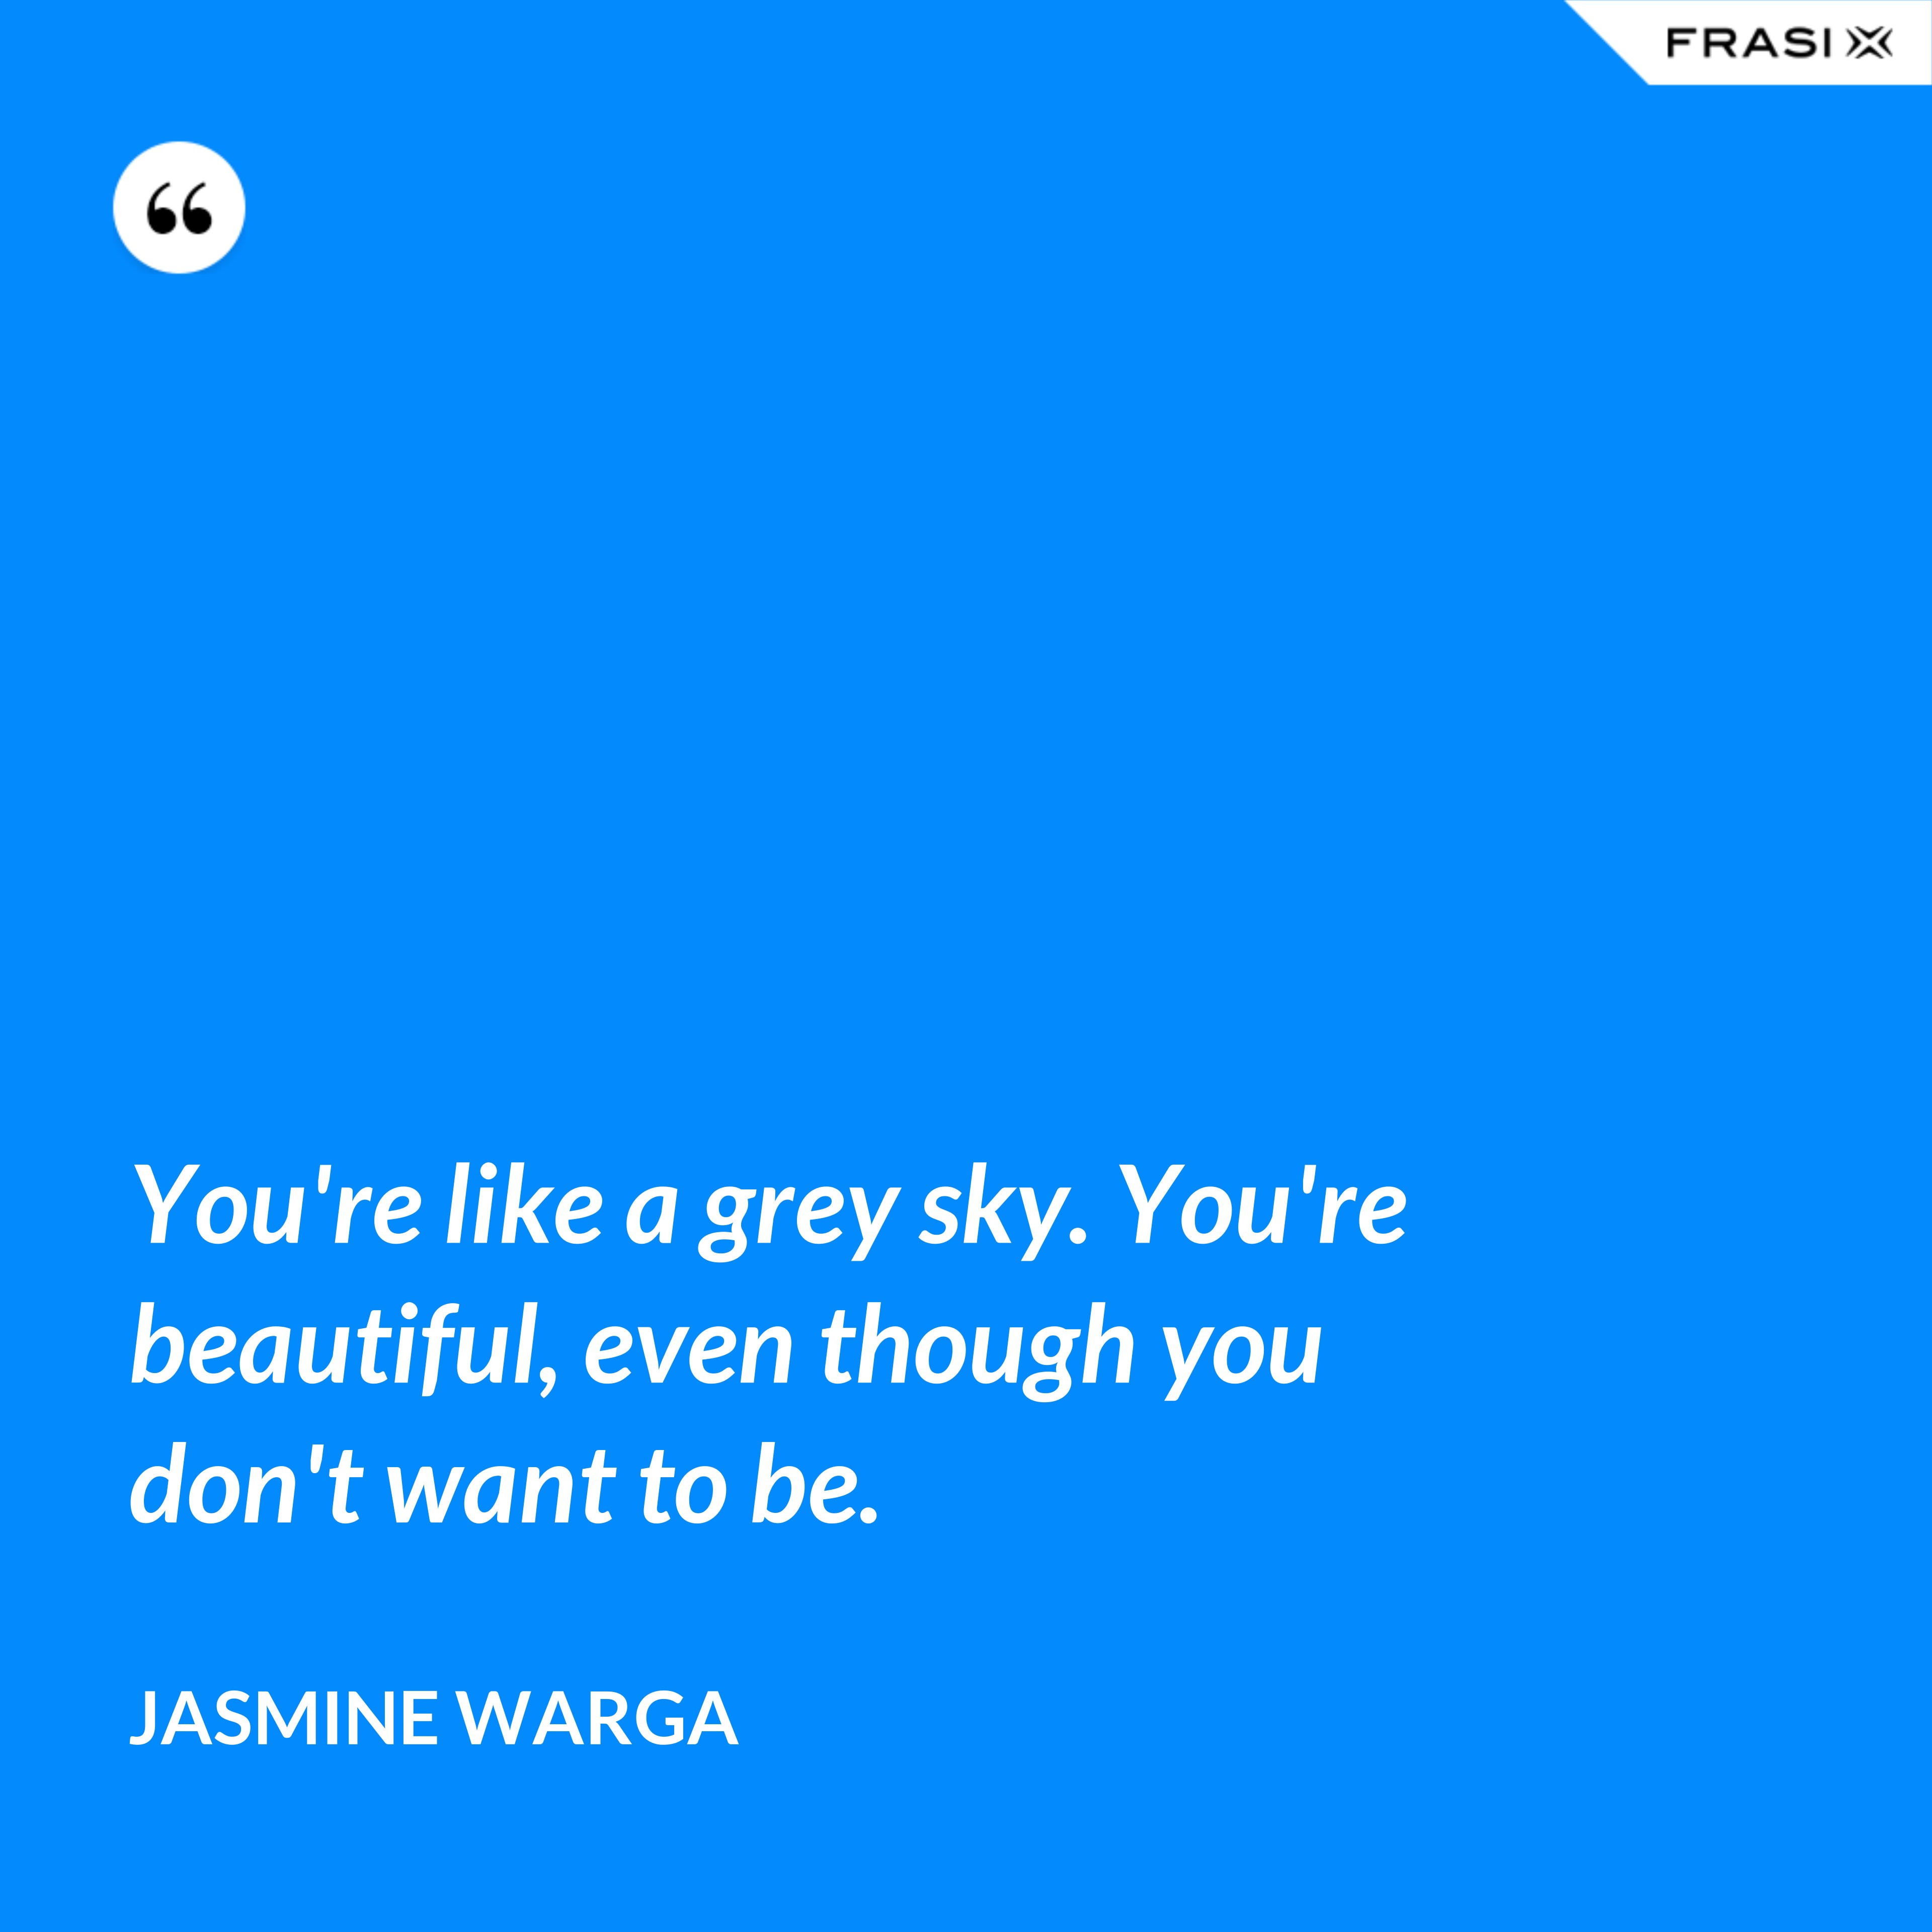 You're like a grey sky. You're beautiful, even though you don't want to be. - Jasmine Warga